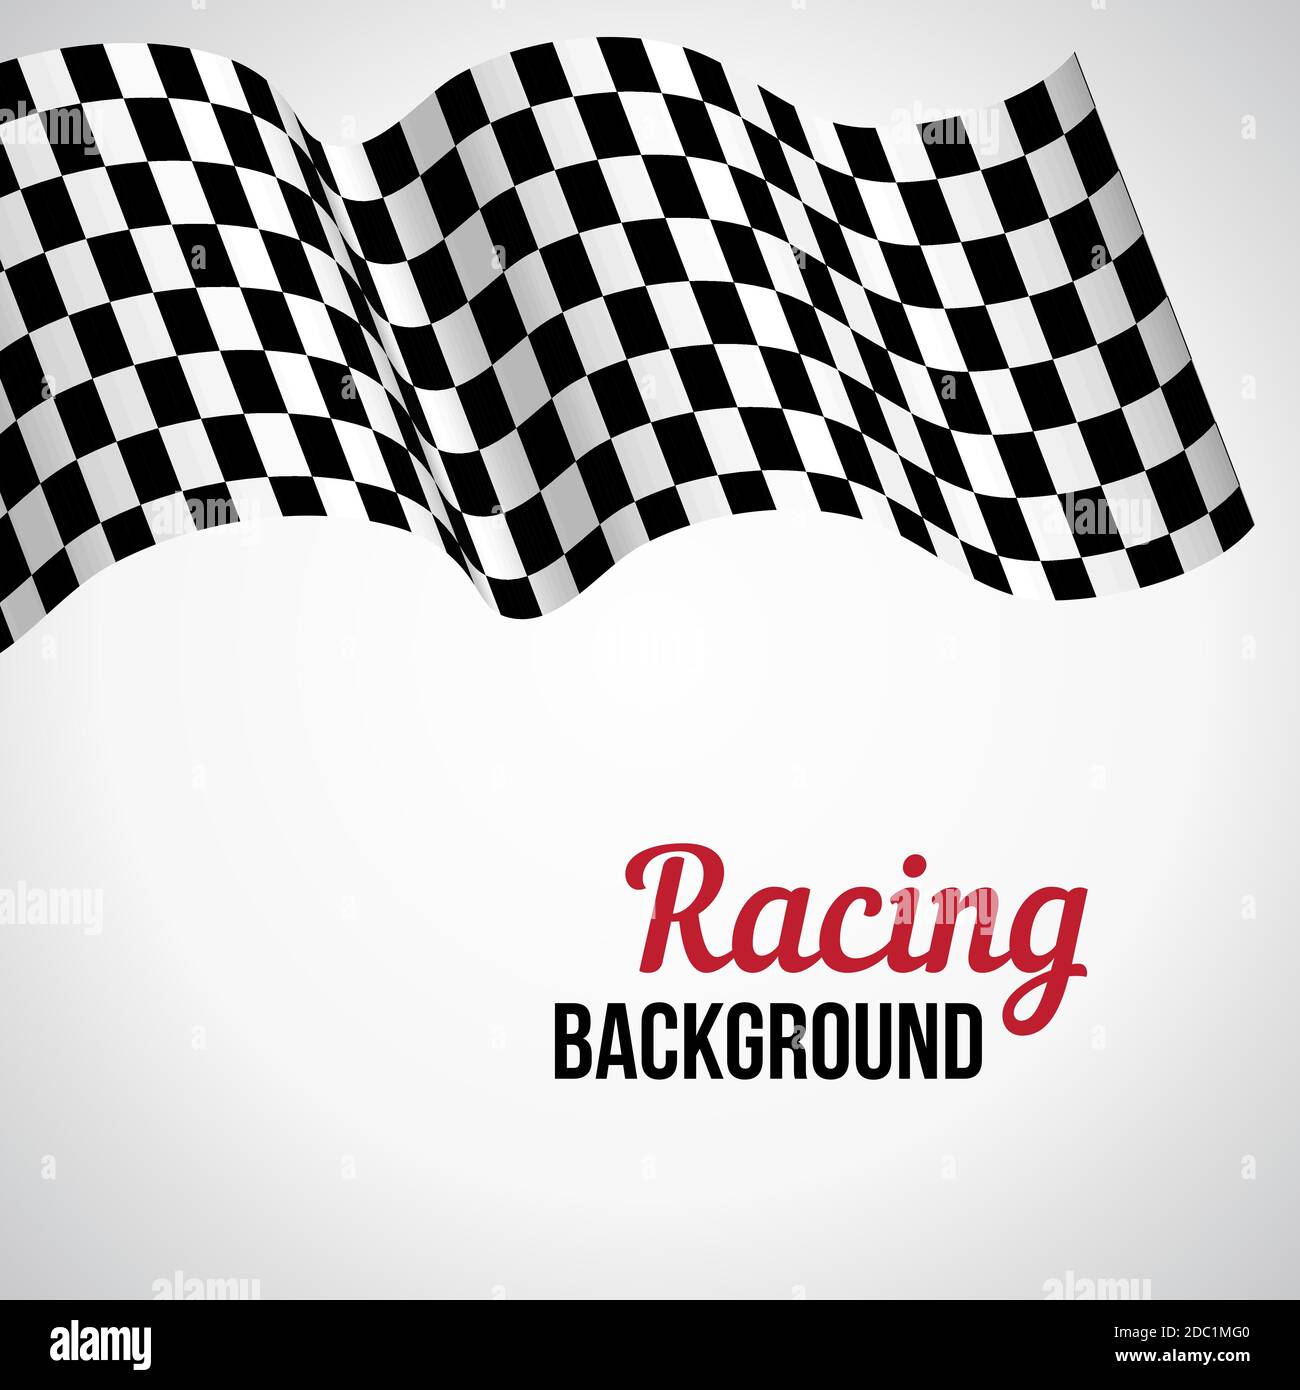 Background with black and white checkered racing flag. Vector illustration. Stock Vector